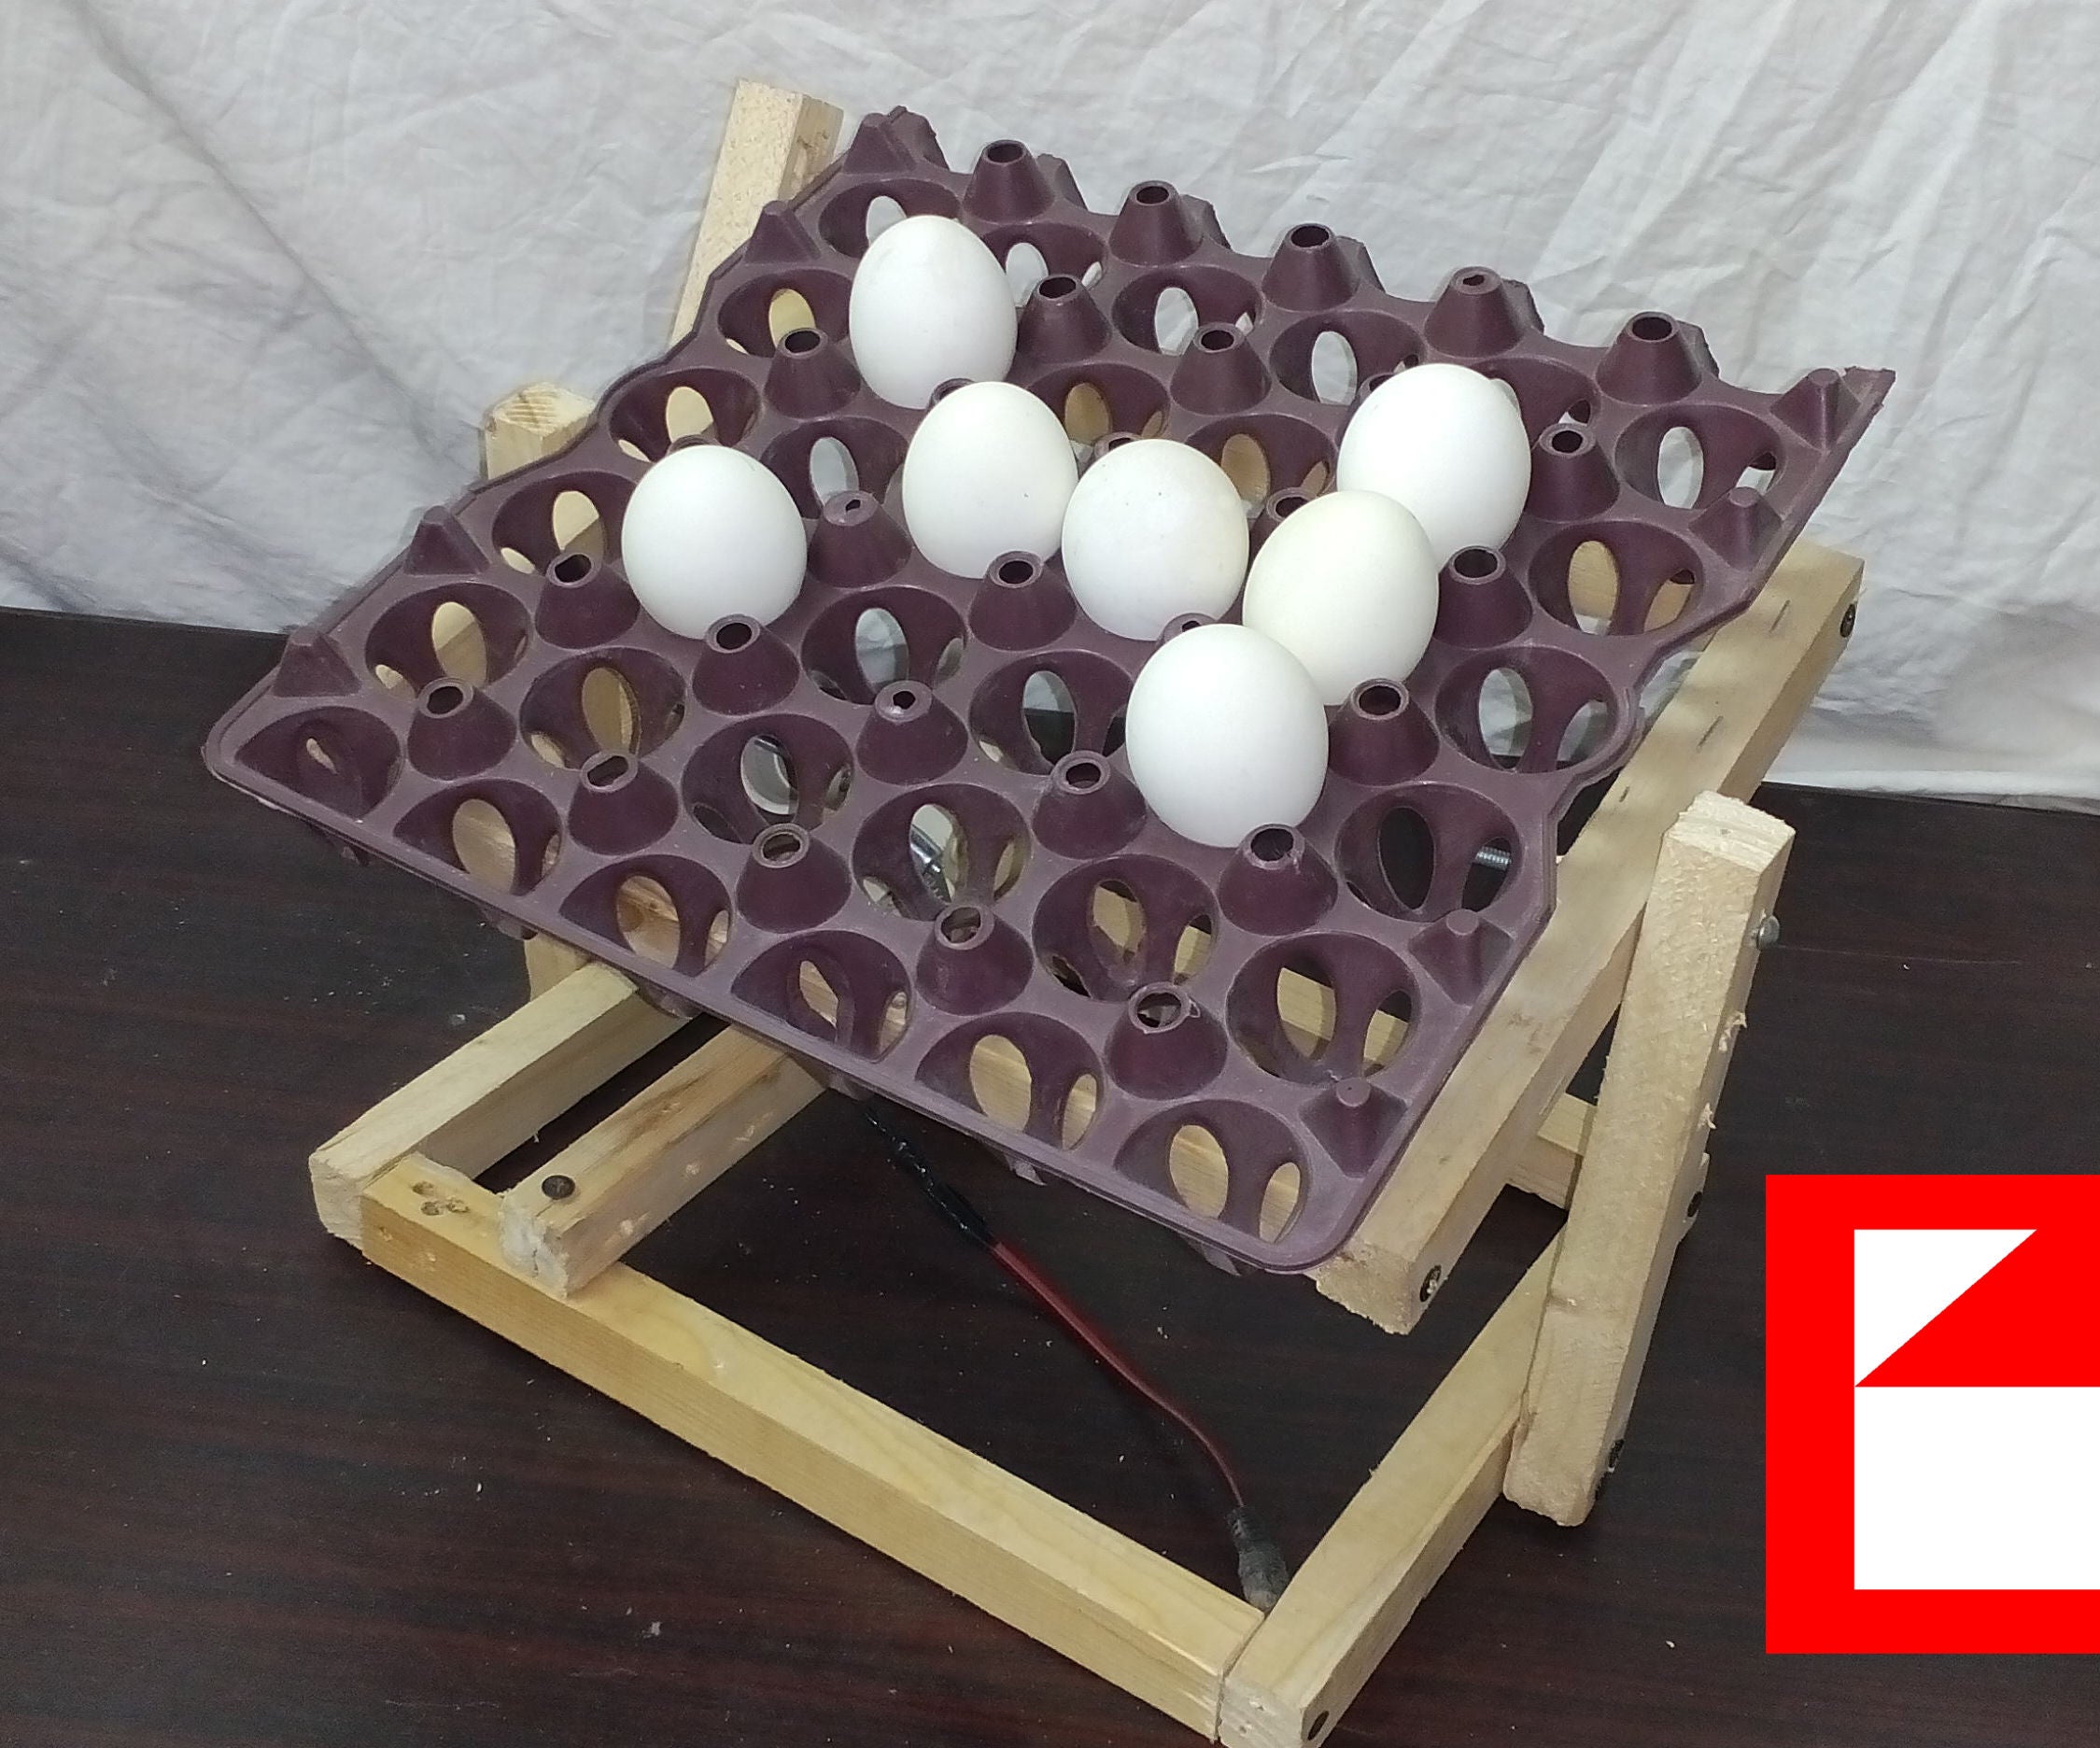 Automatic Turning Egg Incubator Tray From Wood